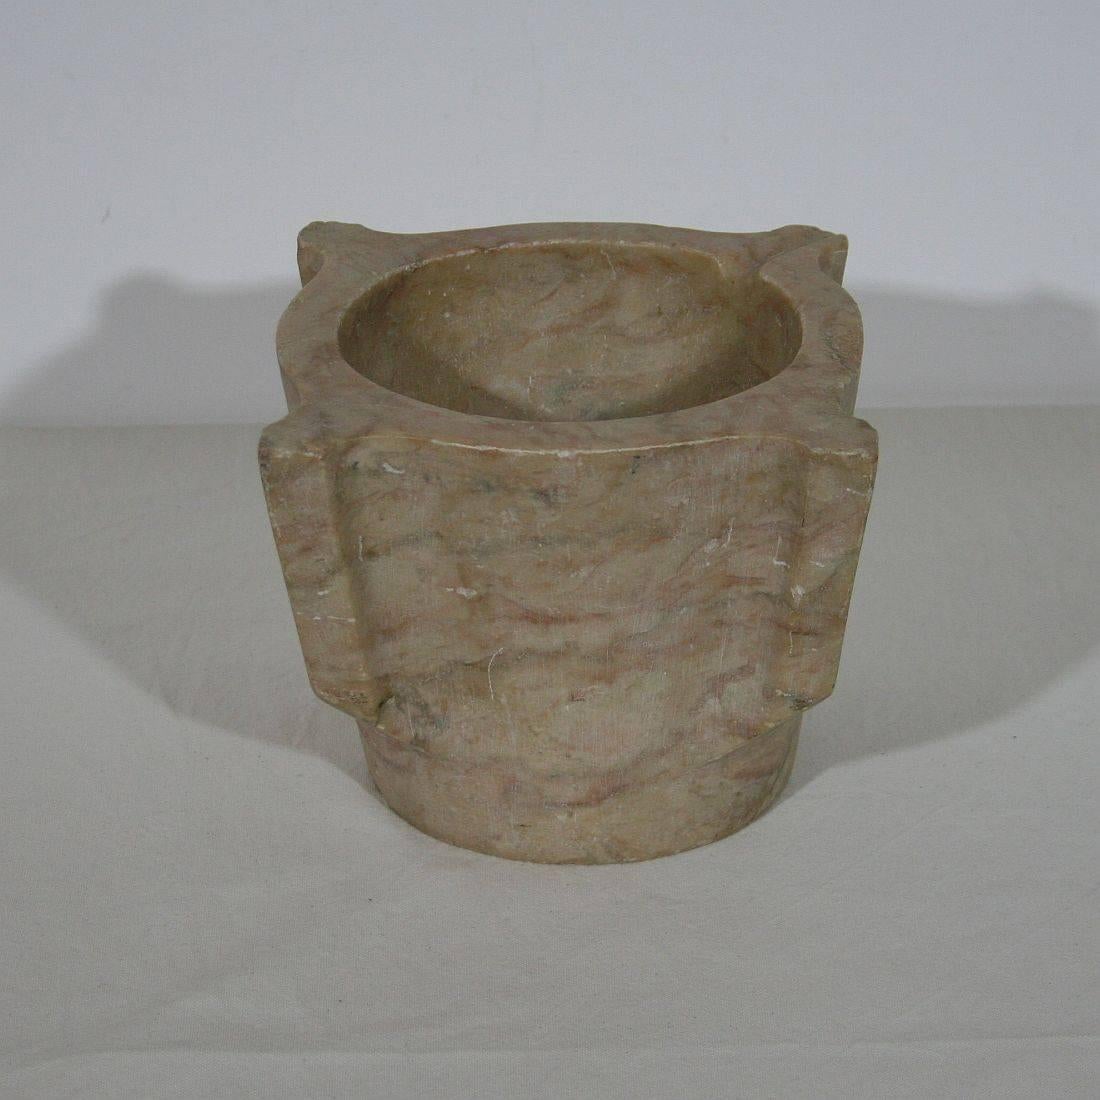 Great marble mortar with a form not seen every day and a beautiful color, France, circa 1800. Weathered.